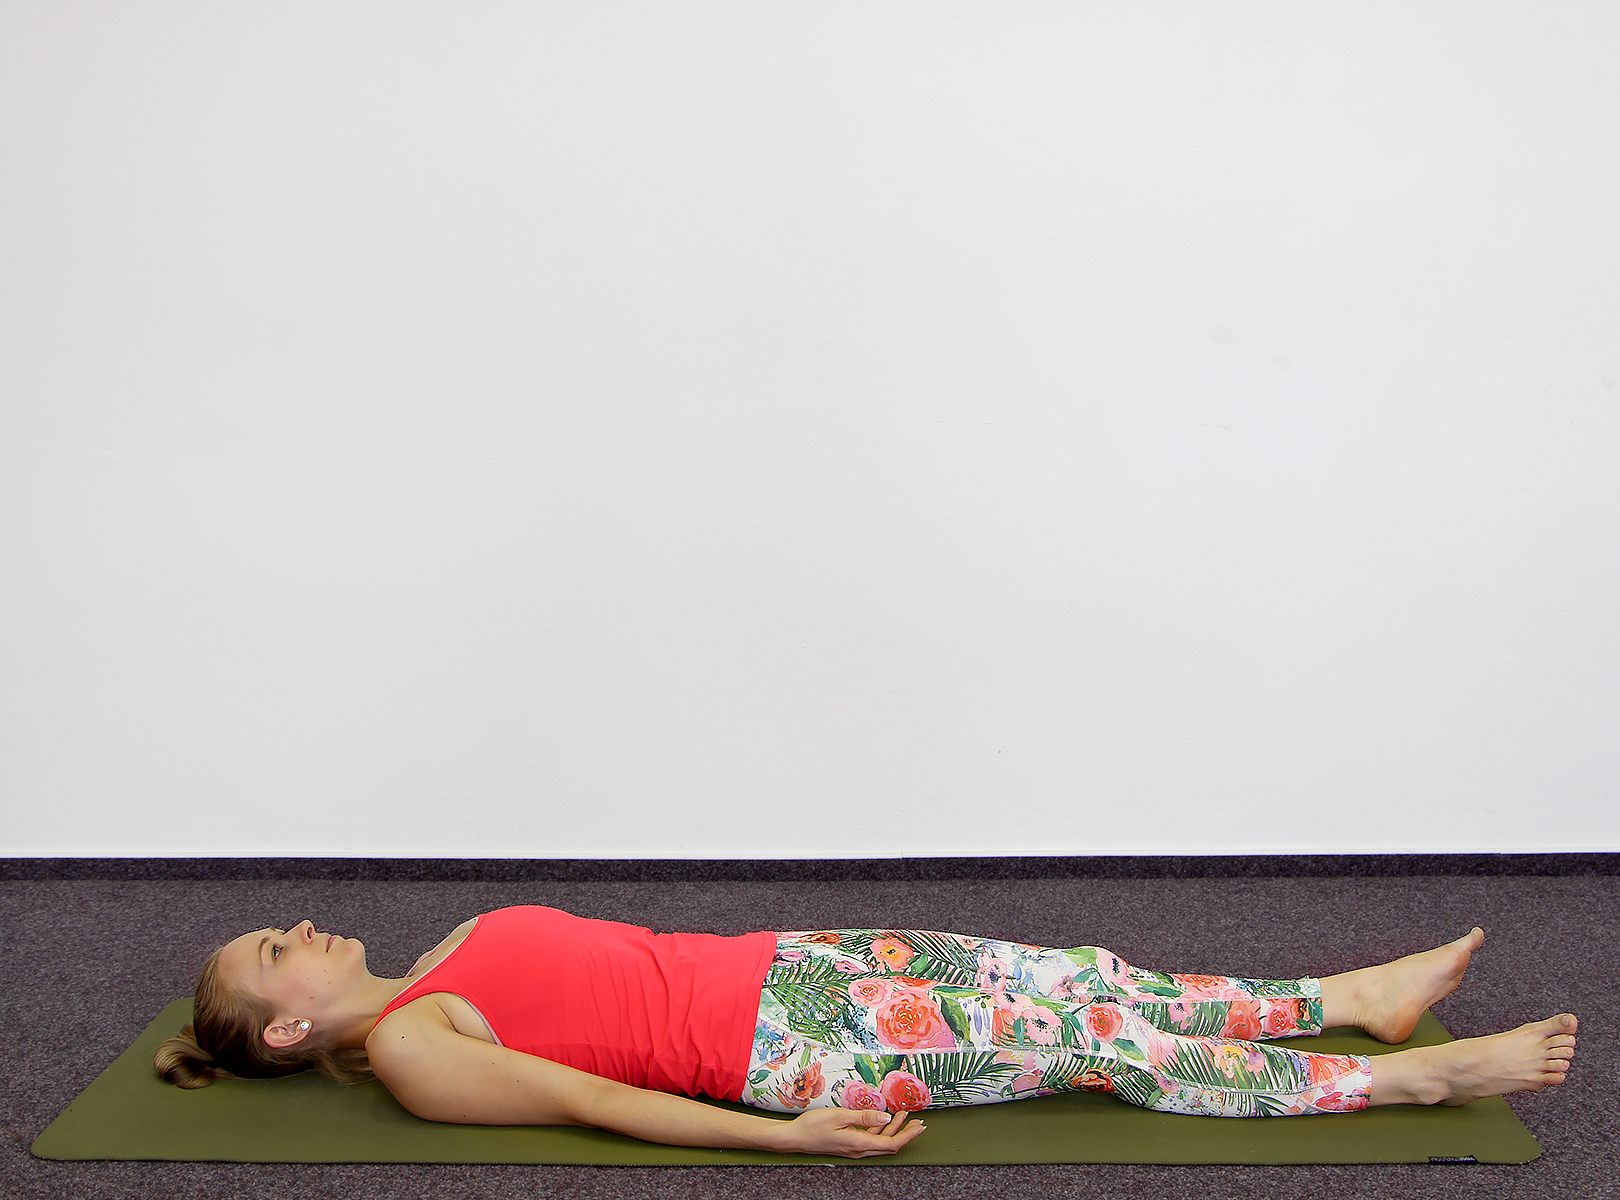 Lying-down body twisting asana to relax the muscles of your back |  TheHealthSite.com